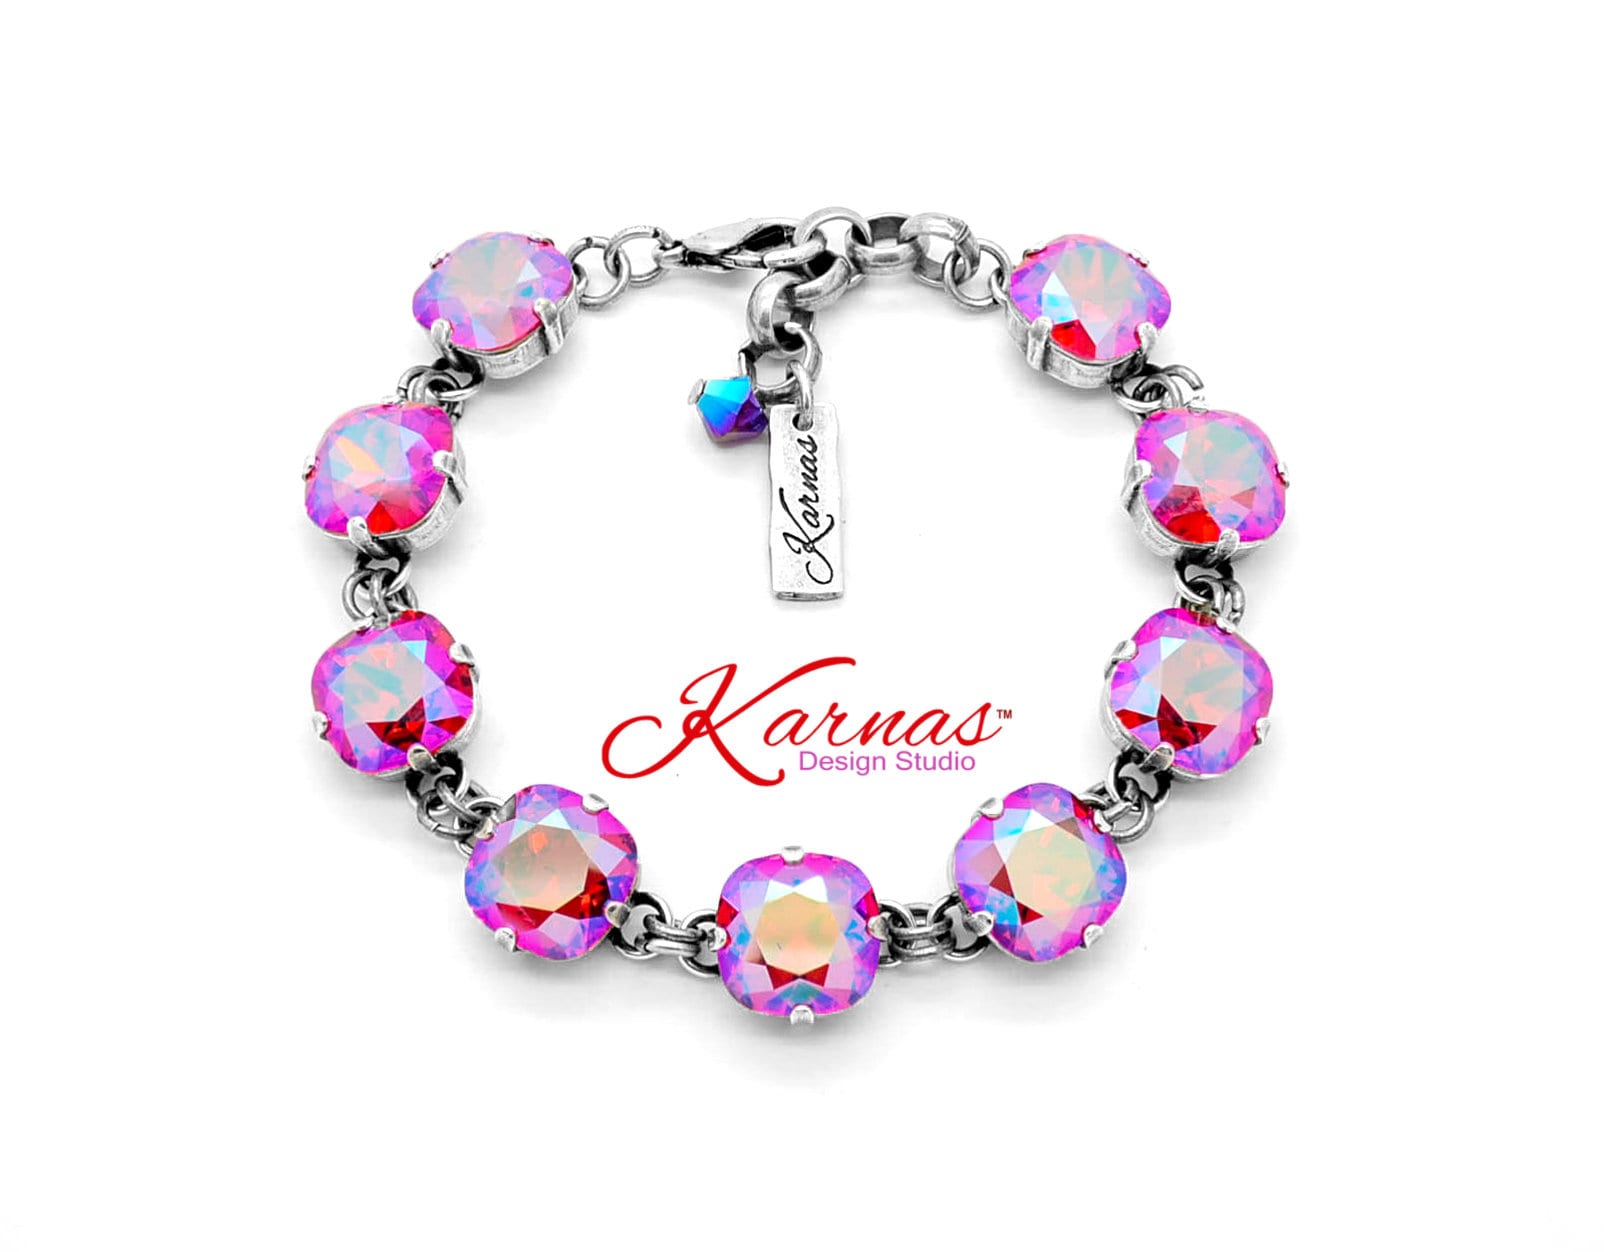 Light Siam Twinkle 12mm Cushion Cut Bracelet Made With Genuine Crystal Choose Your Finish Karnas Design Studio Free Shipping